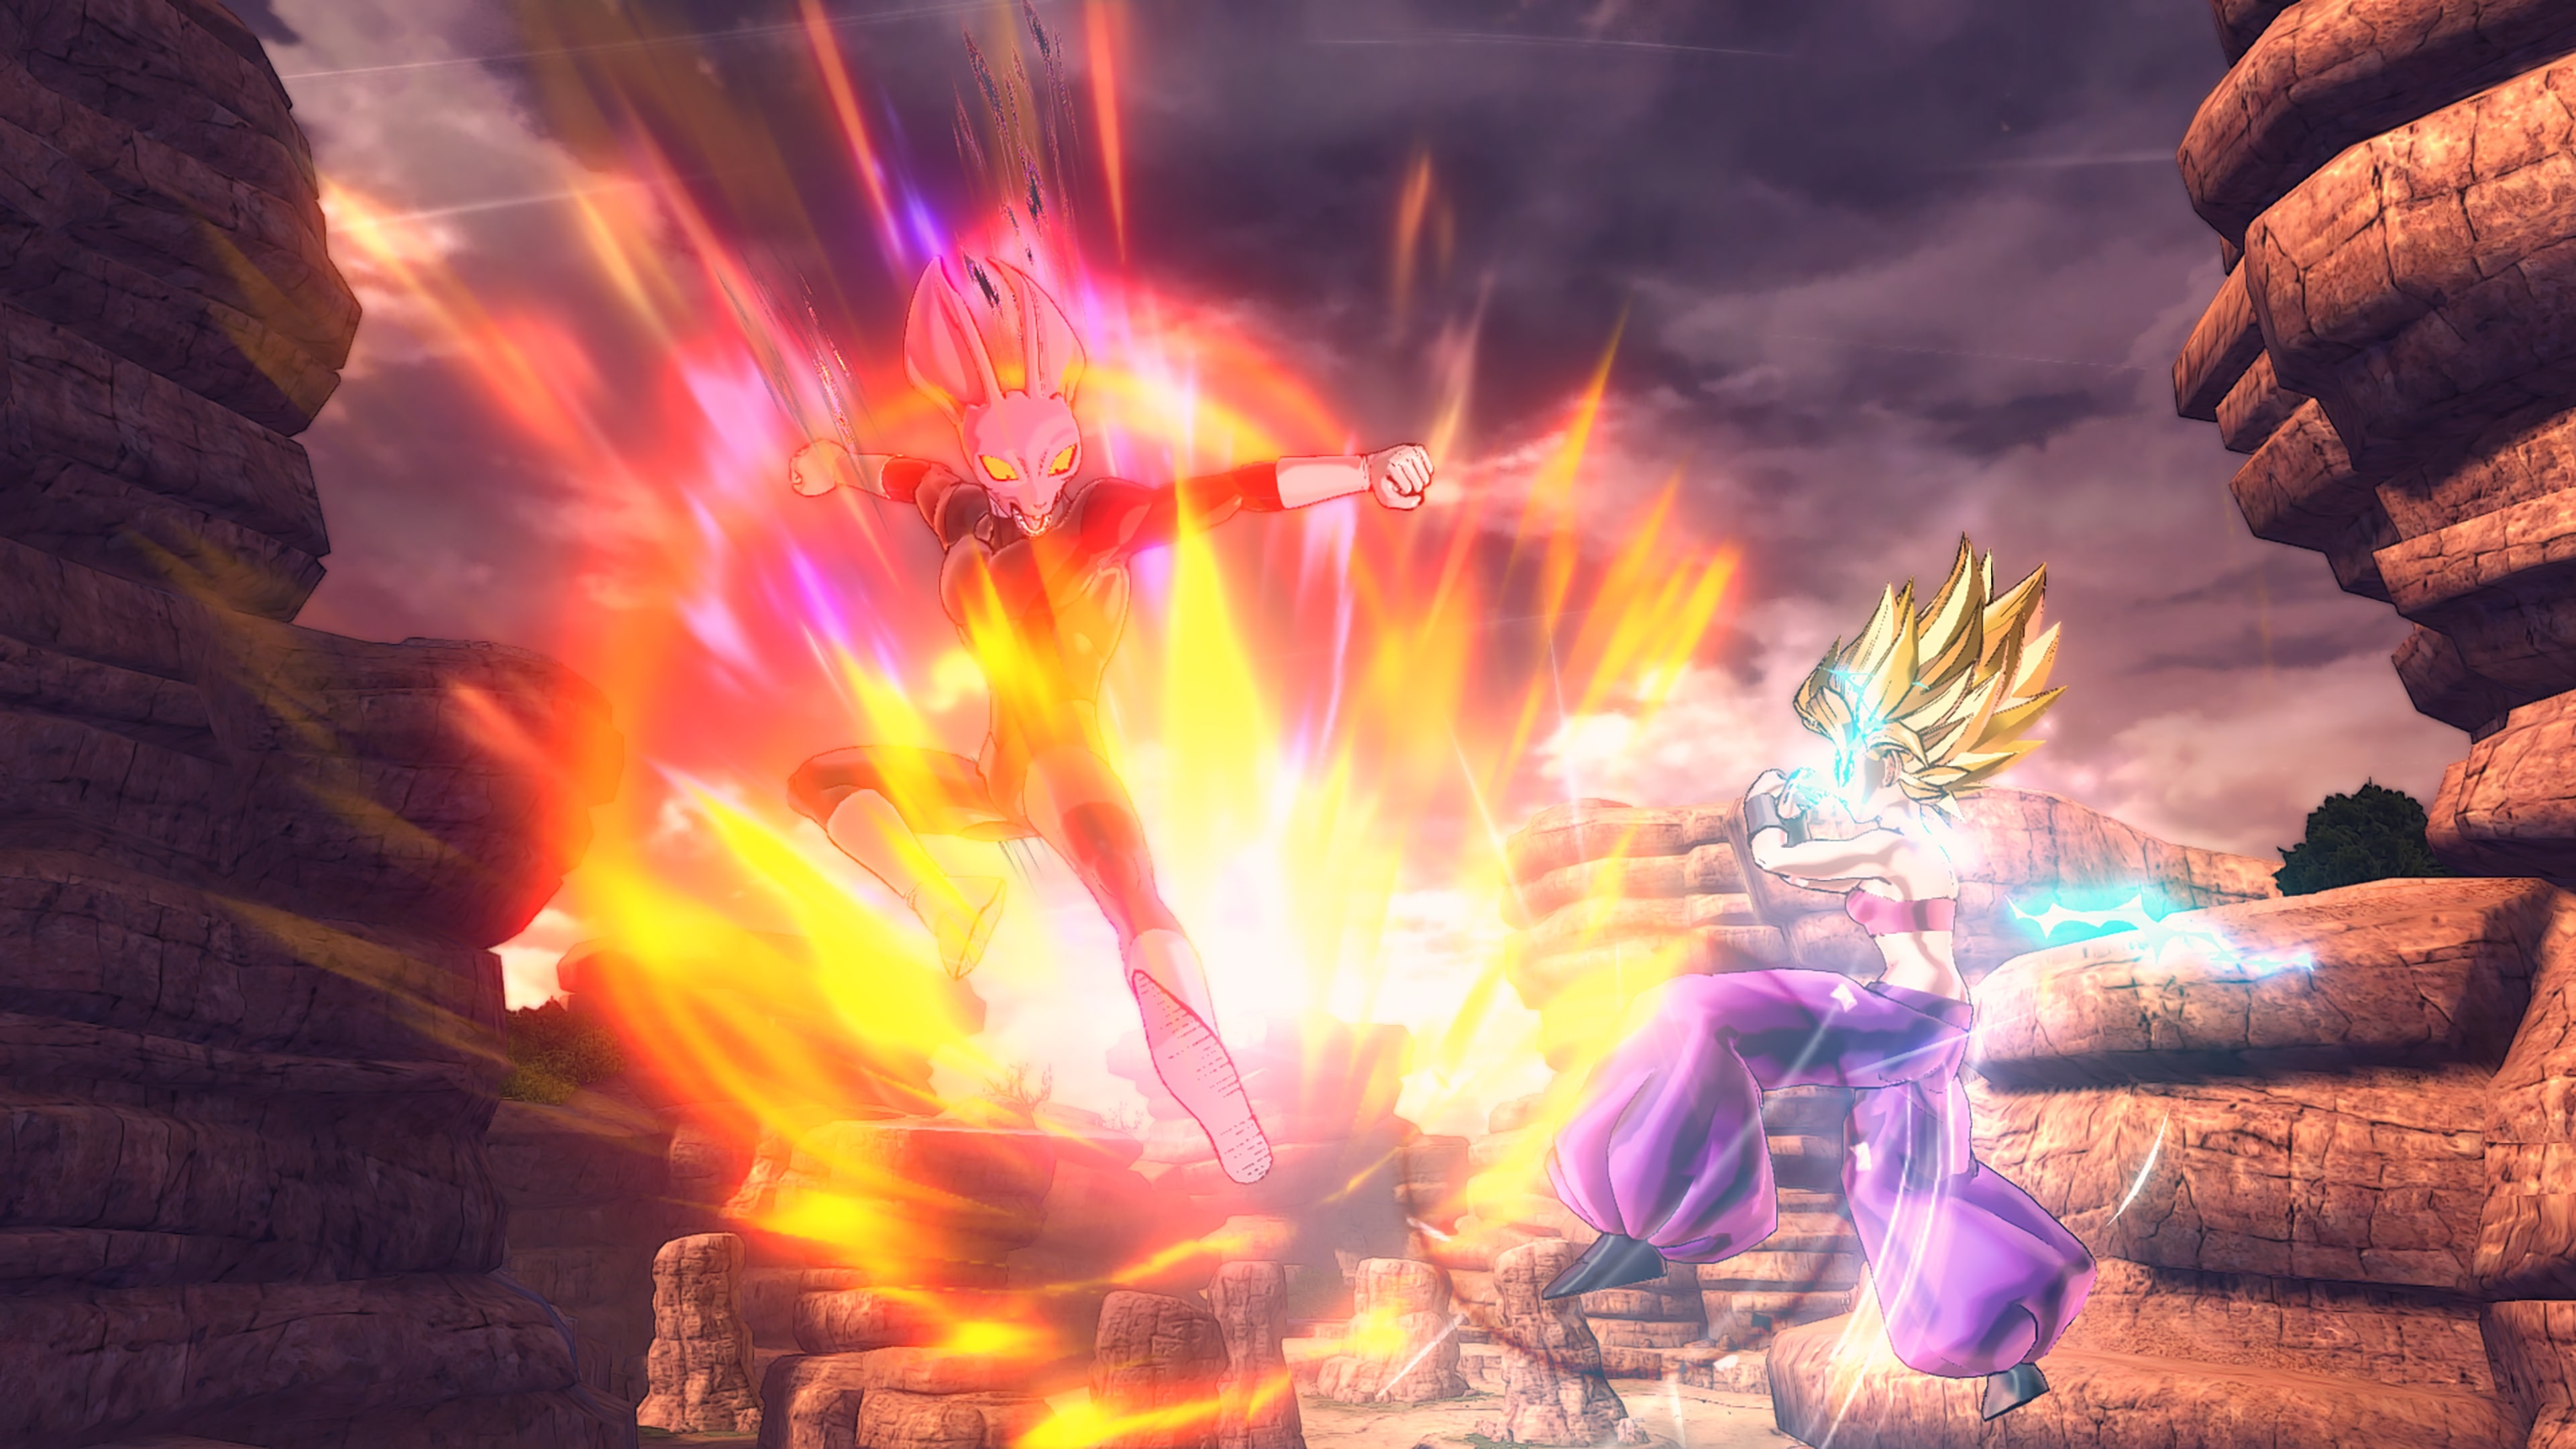 Dragon Ball Xenoverse 2 at the best price